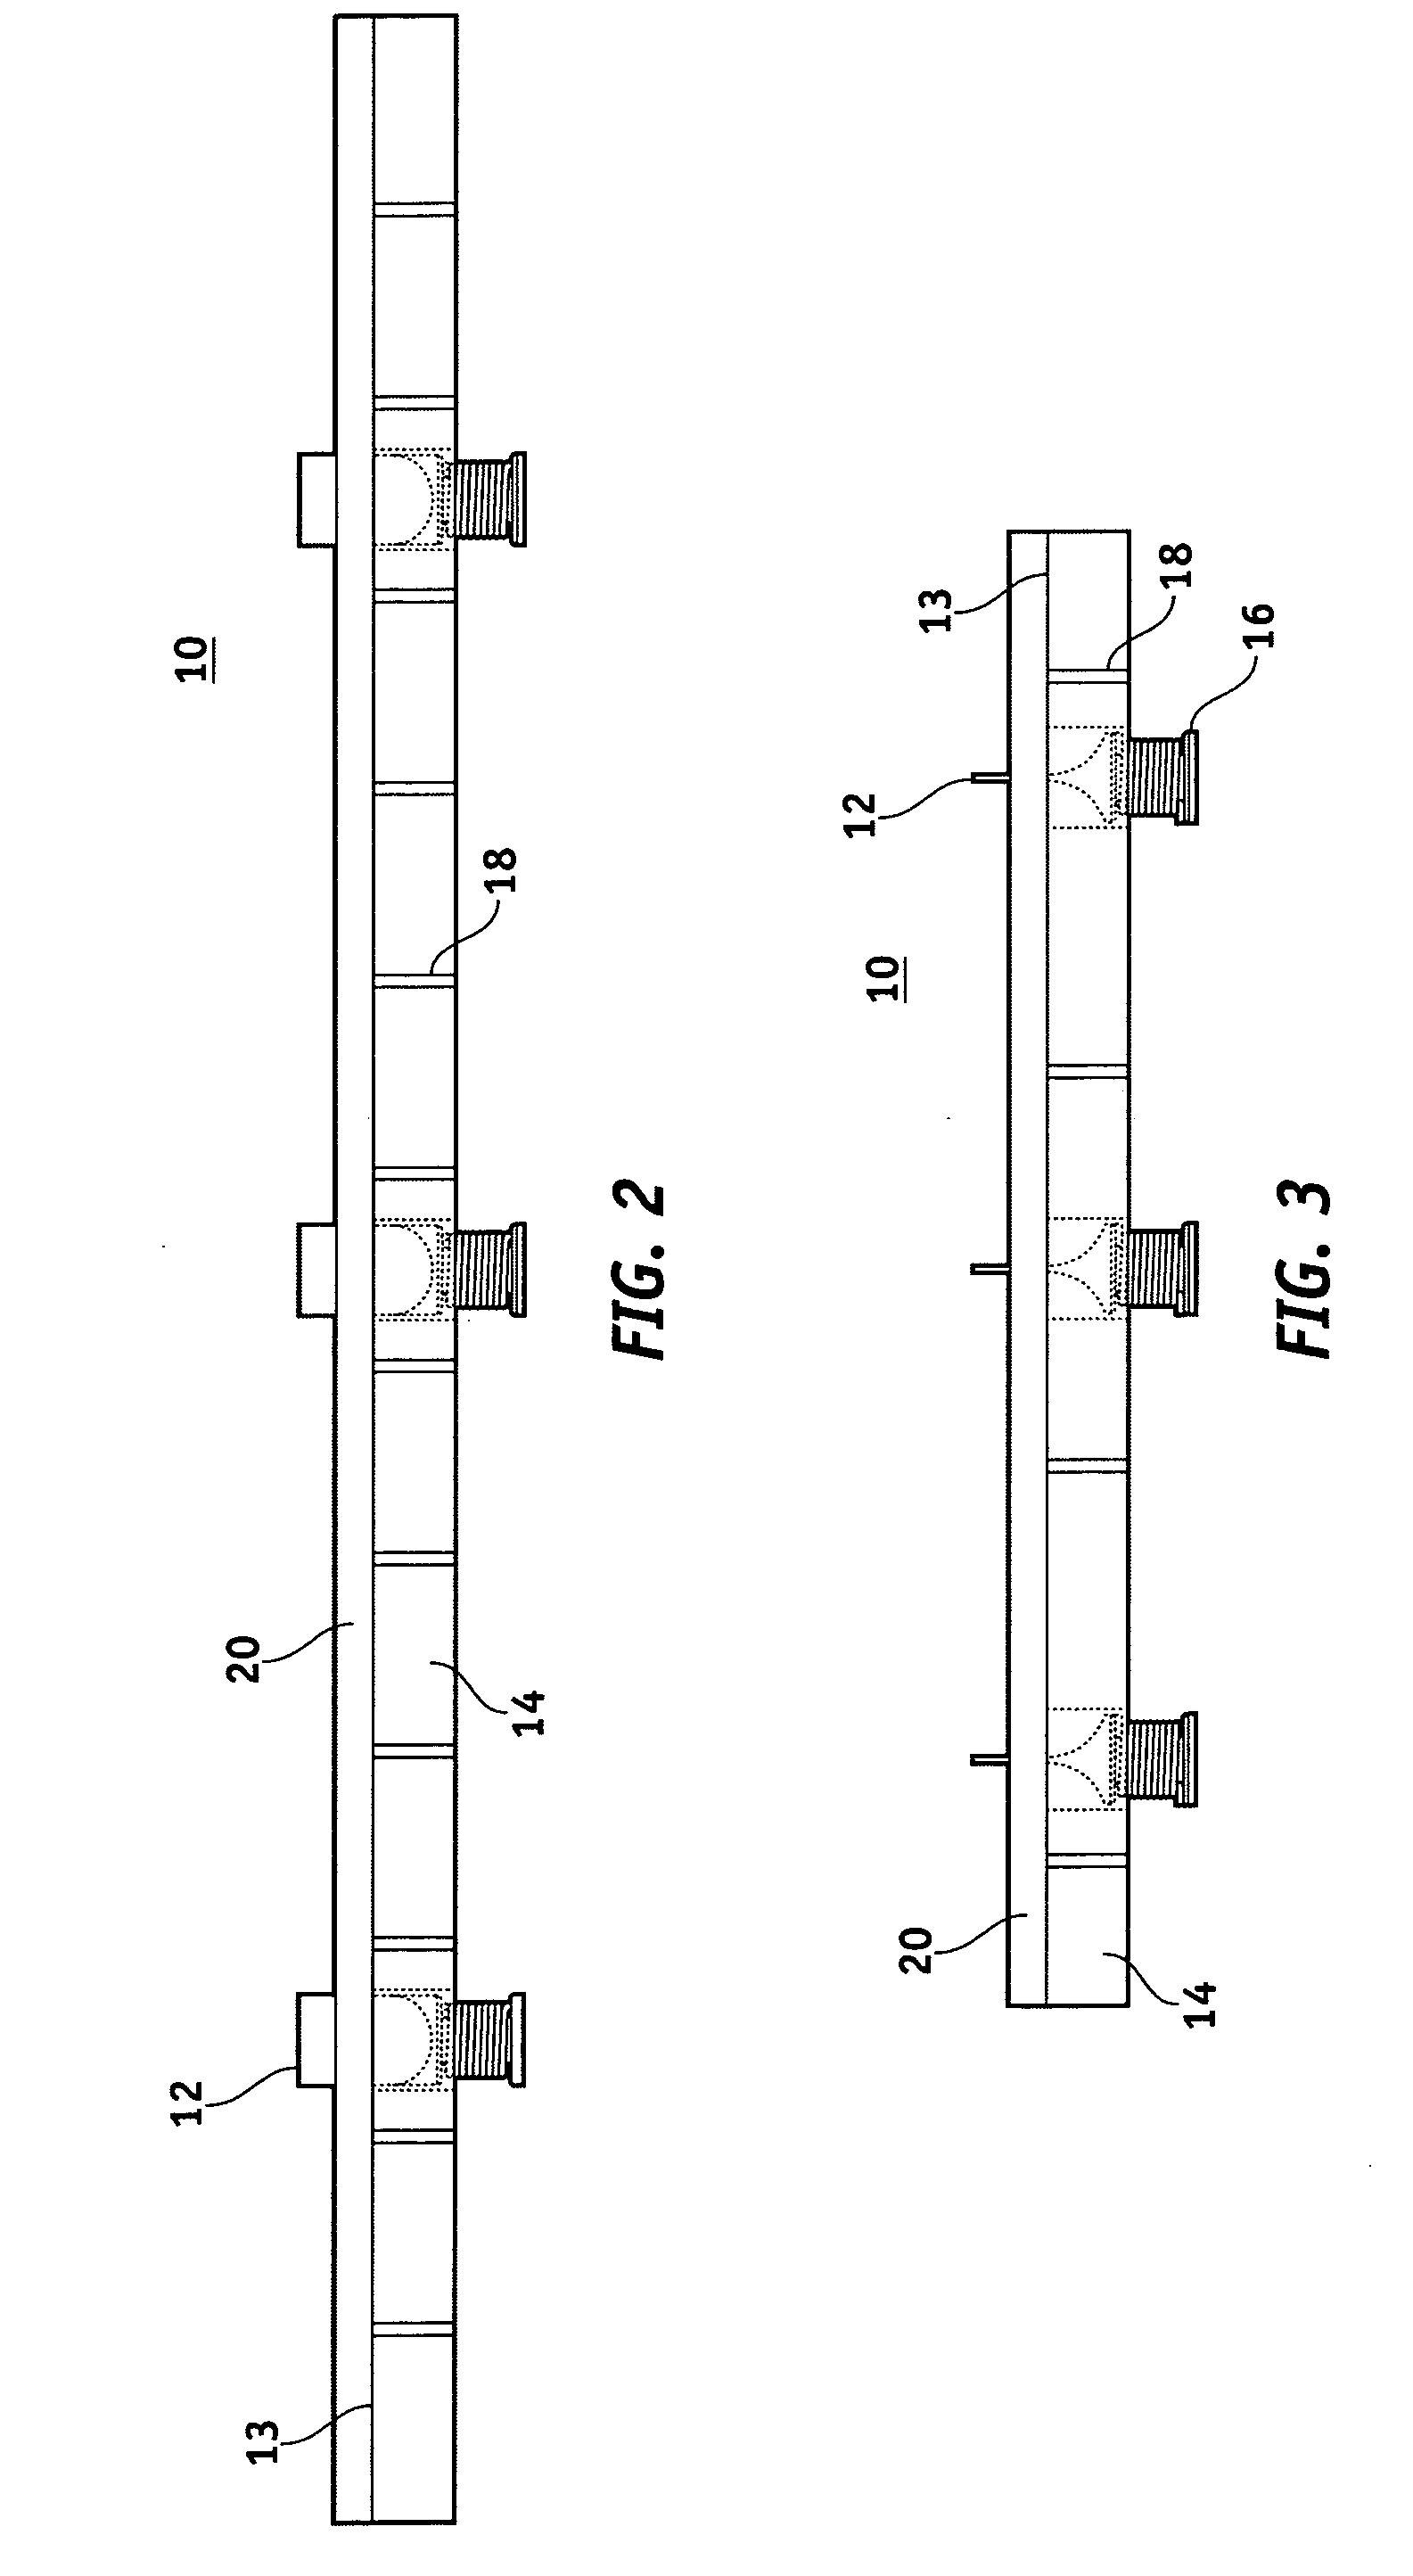 Apparatus and method for placing spacers in an emissive display